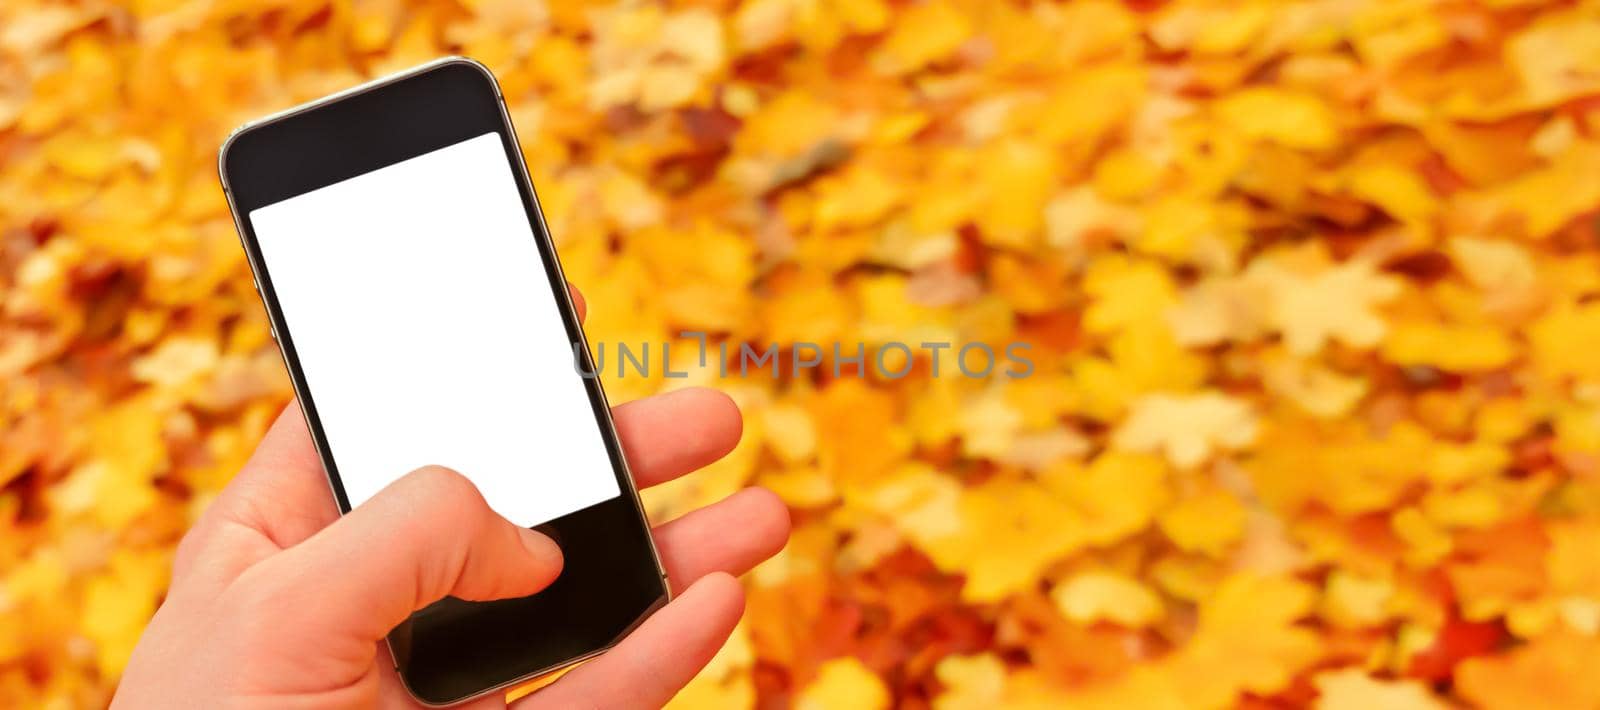 Fallen leaves autumn mobile phone mockup hand holding smartphone nature fall background leaves falling. Blank mobile mockup smartphone blank screen hand phone nature autumn banner. Screen mobile hand